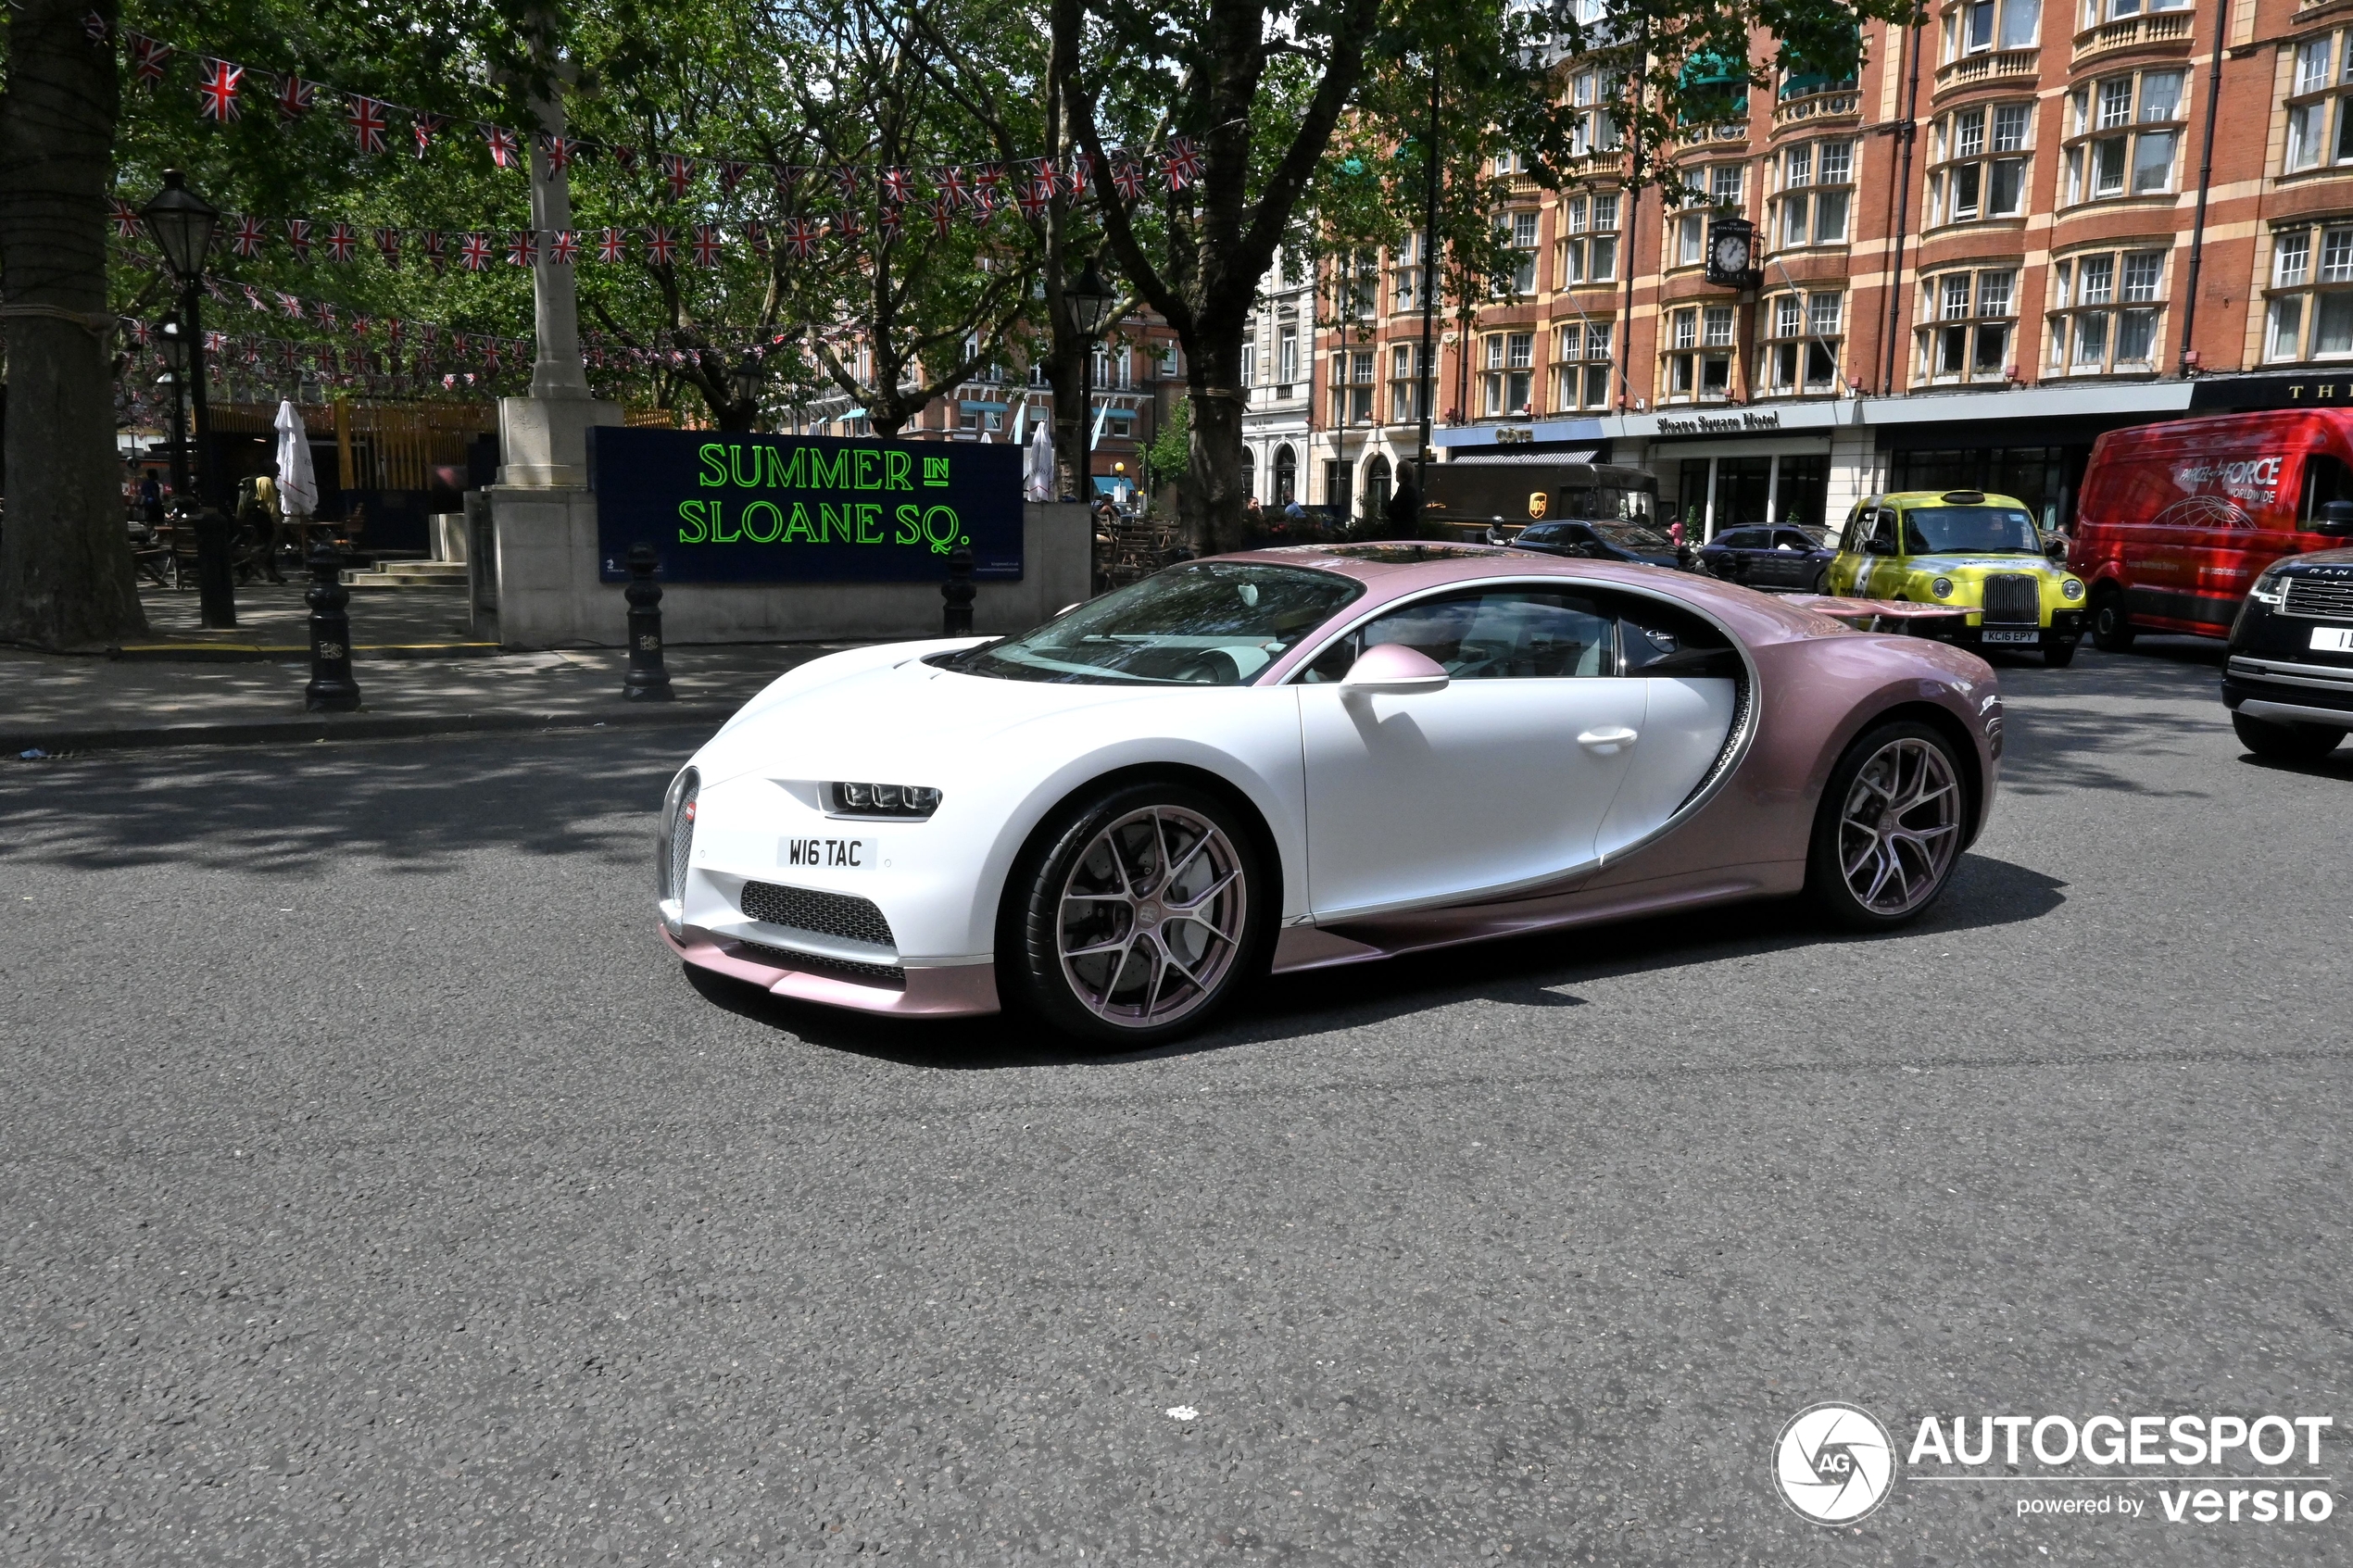 The Chiron Sport "Alice" on the streets of London